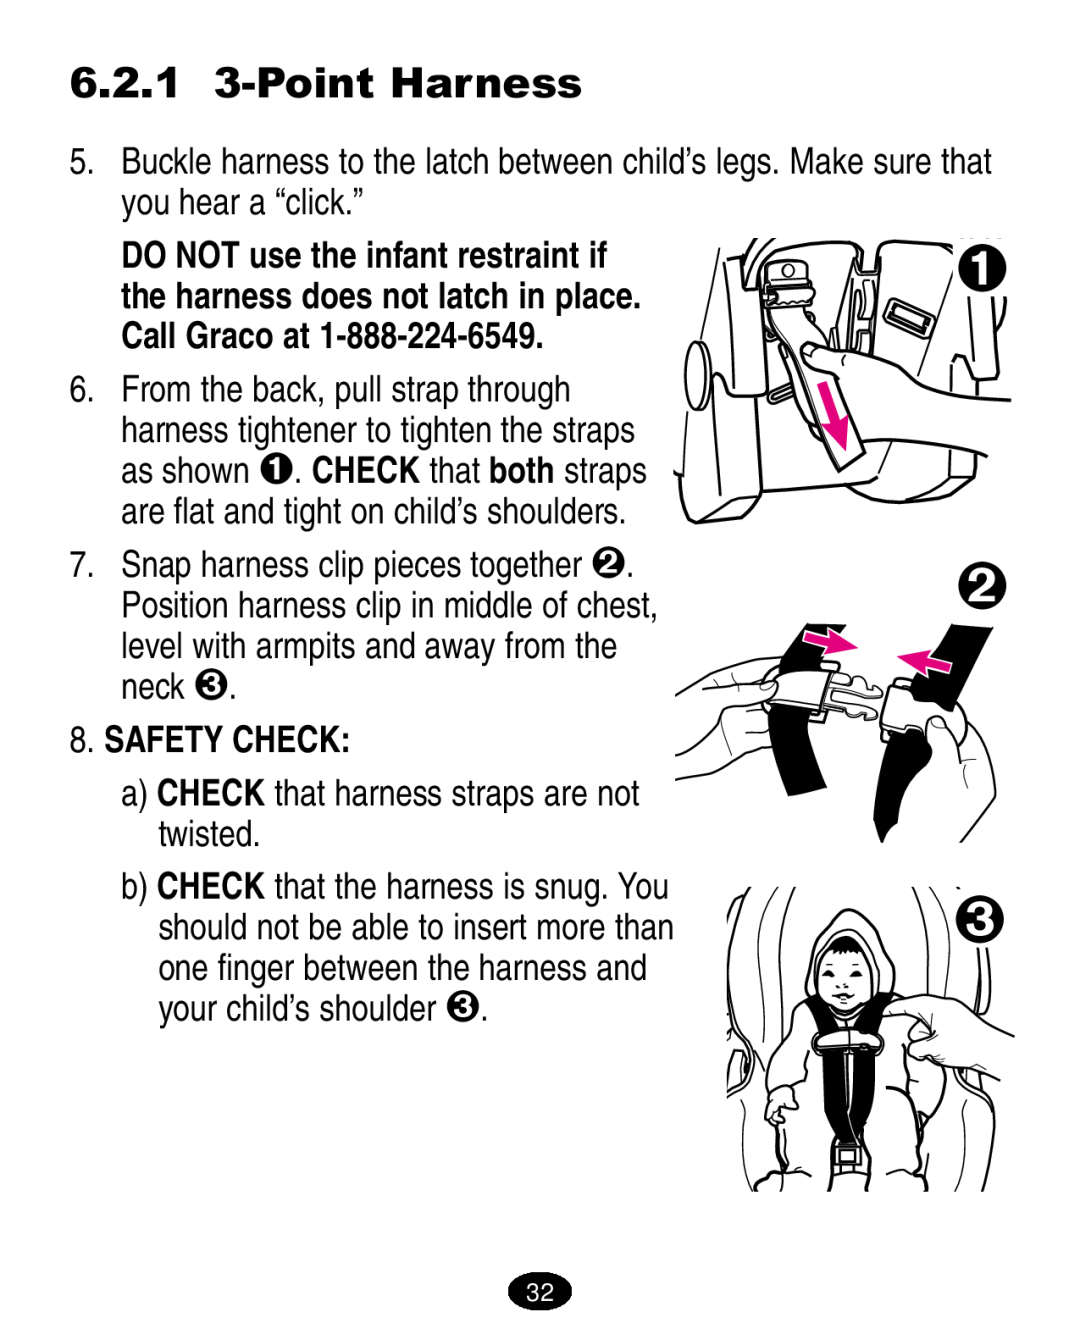 Graco ISPA005AA manual 6.2.1 3-Point Harness, DO NOT use the infant restraint if, the harness does not latch in place 